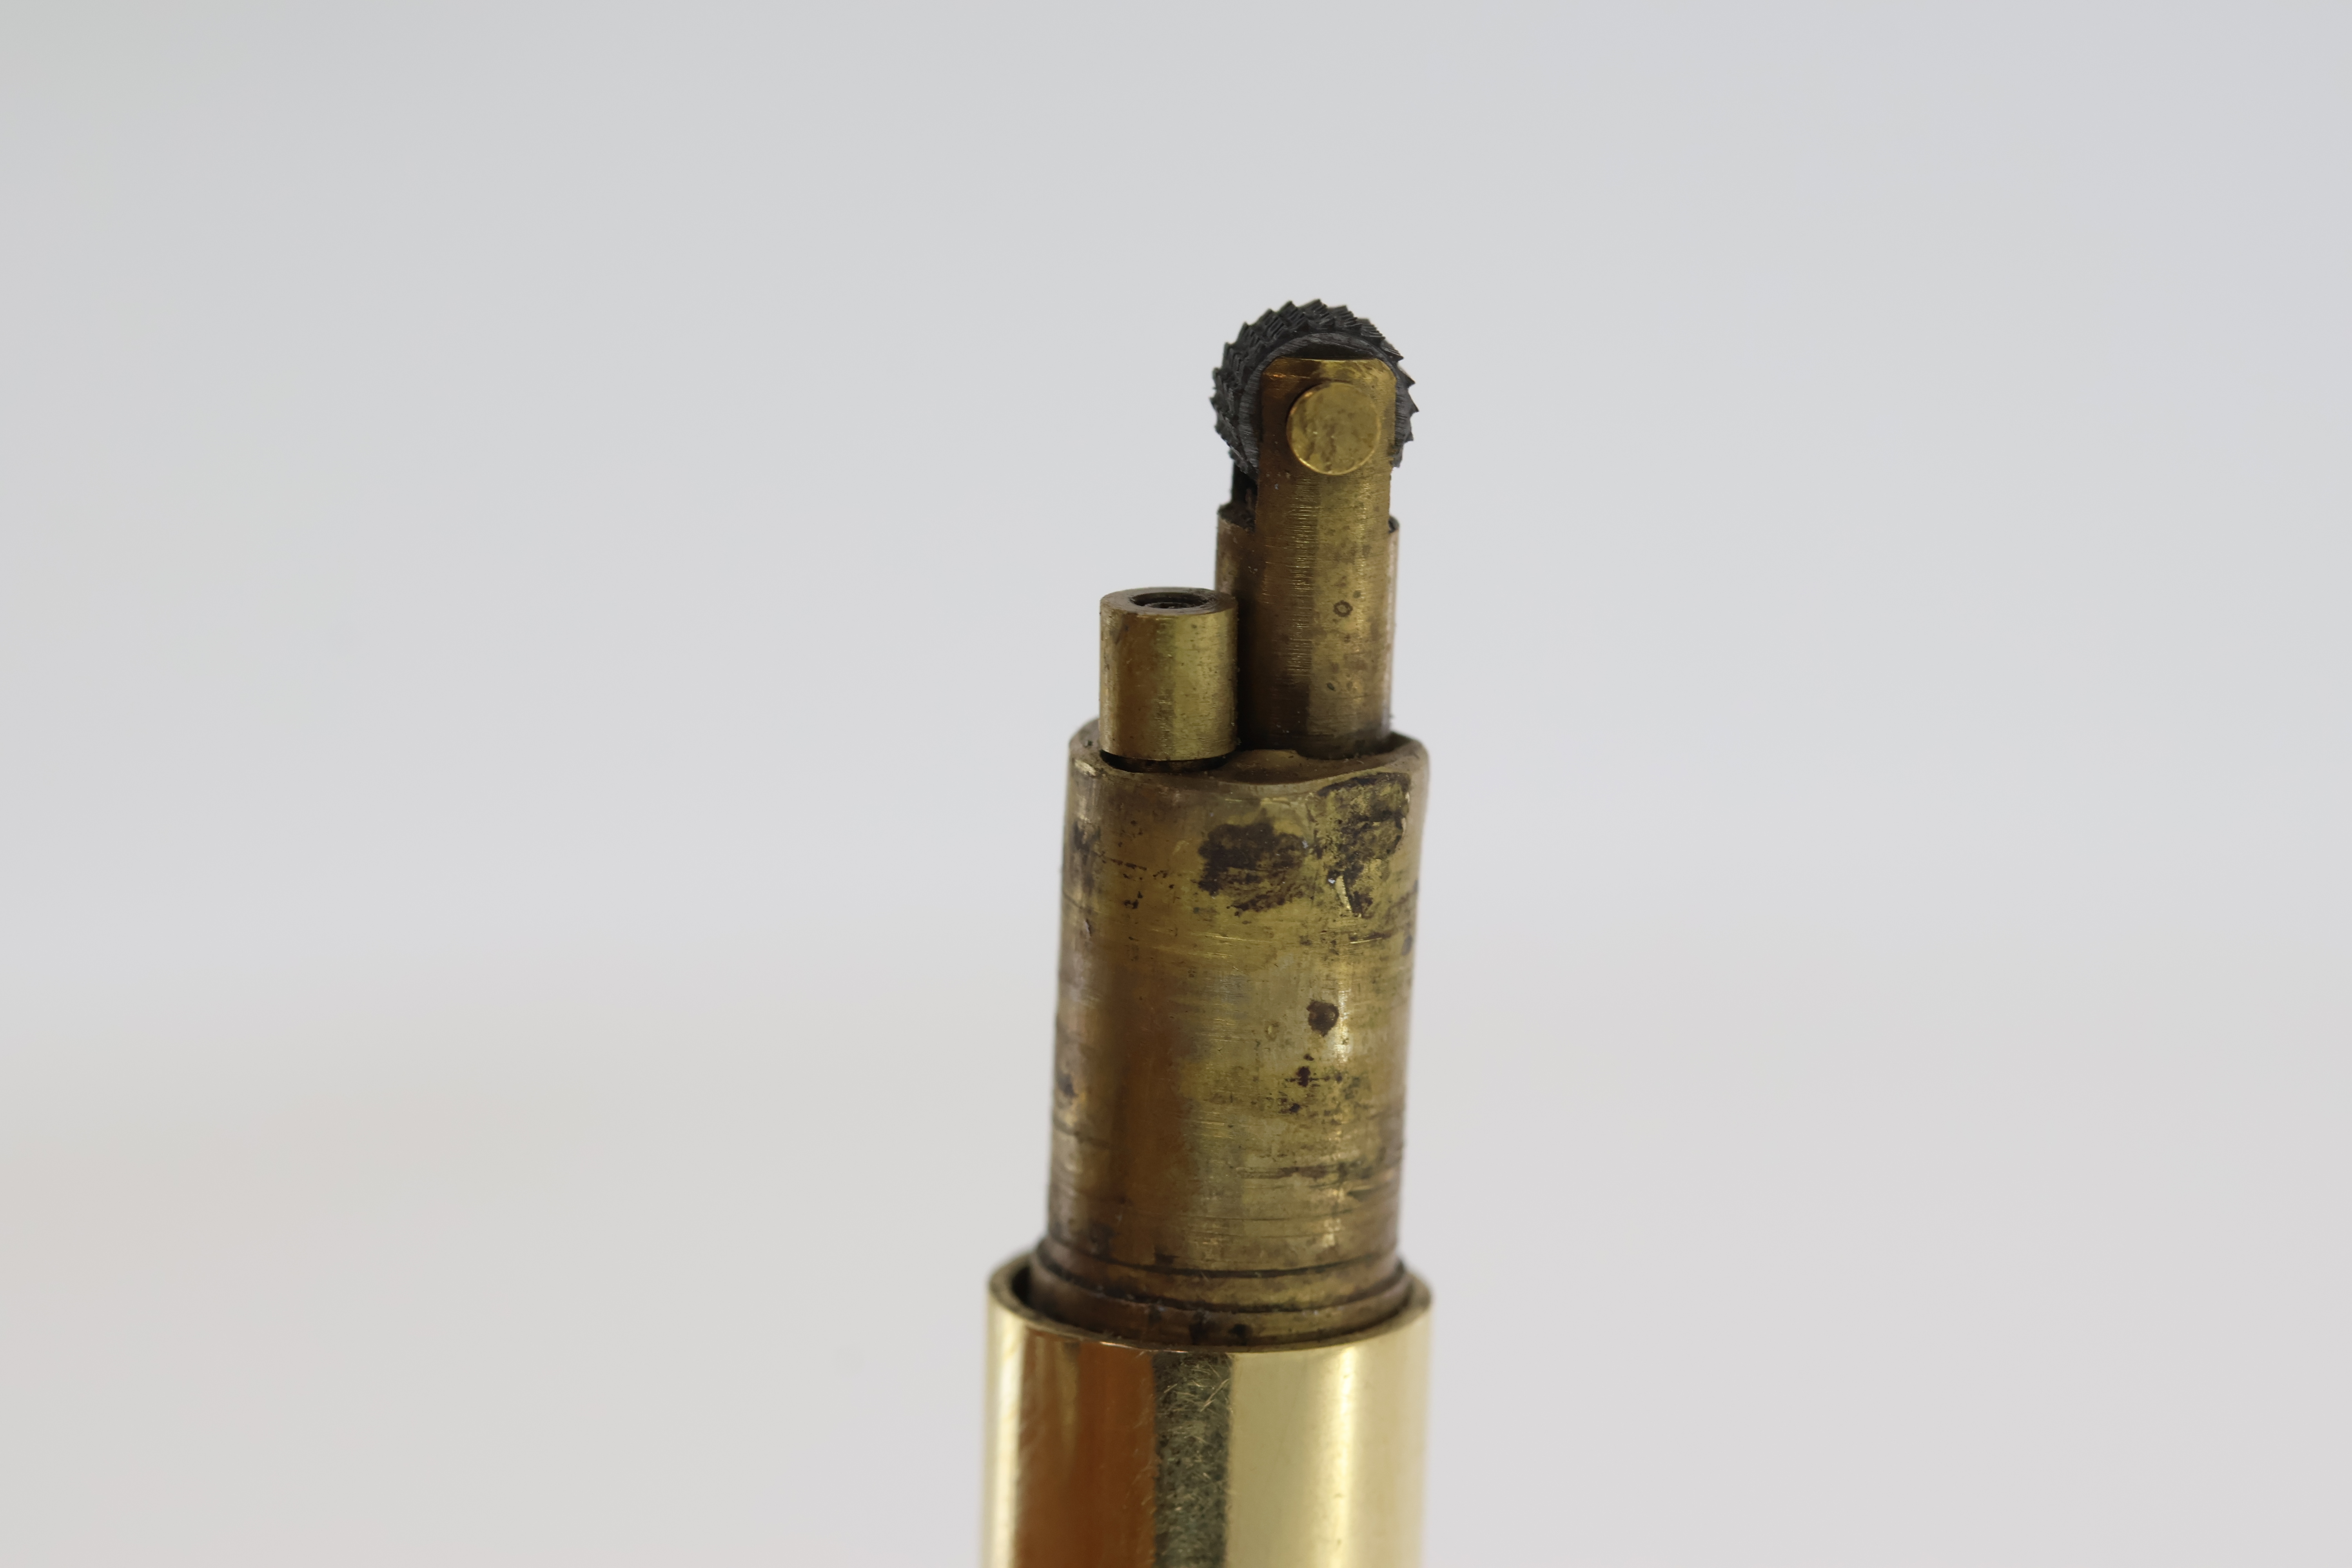 Roy King - Possibly Piece Unique - Custom designed 18ct Cigarette Lighter, formed as an exact - Image 6 of 7